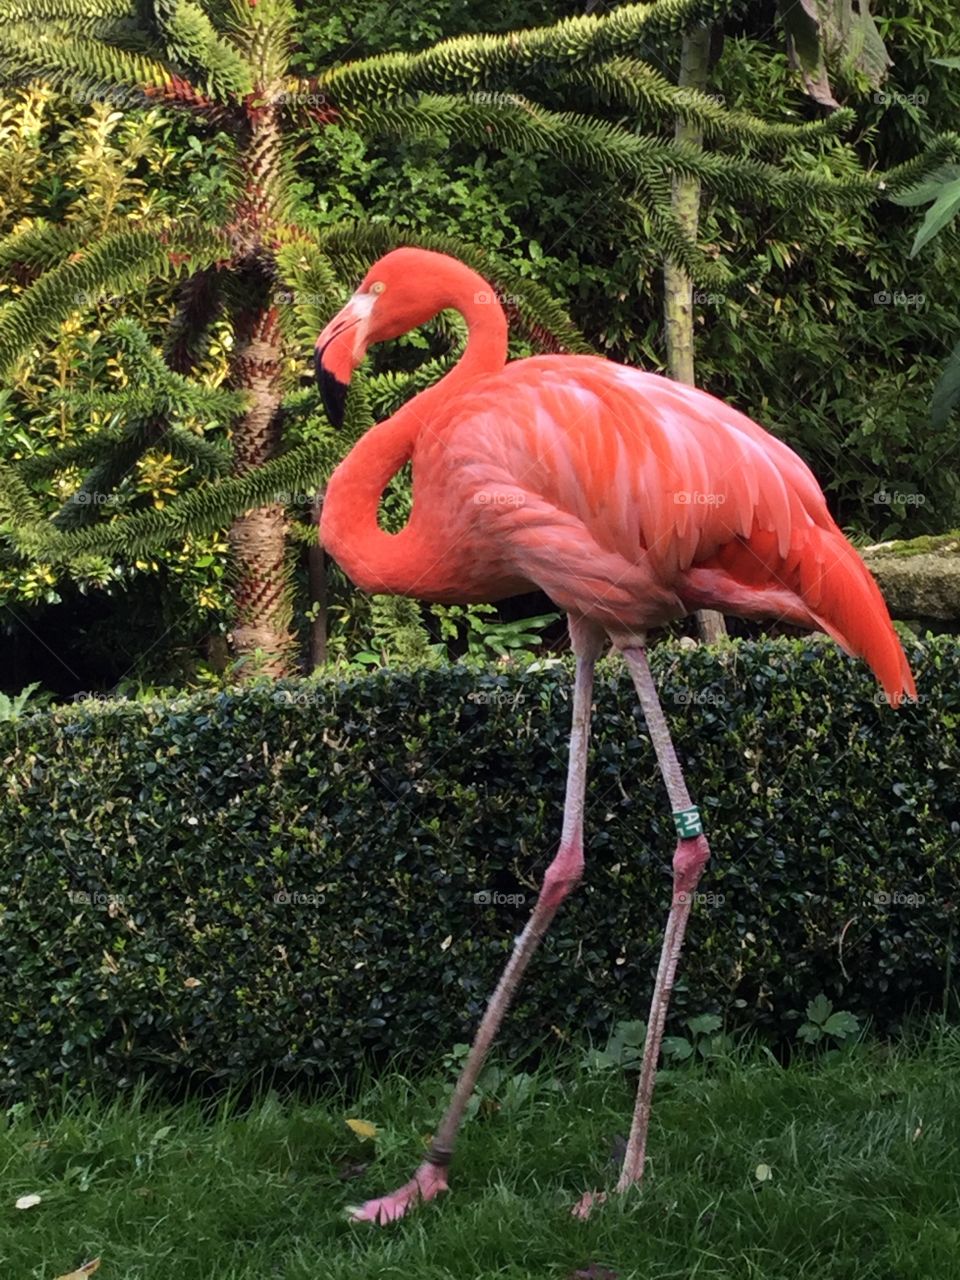 A stunning flamingo, from Cornwall’s zoo. Would look quirky and exciting on a bedroom wall❤️